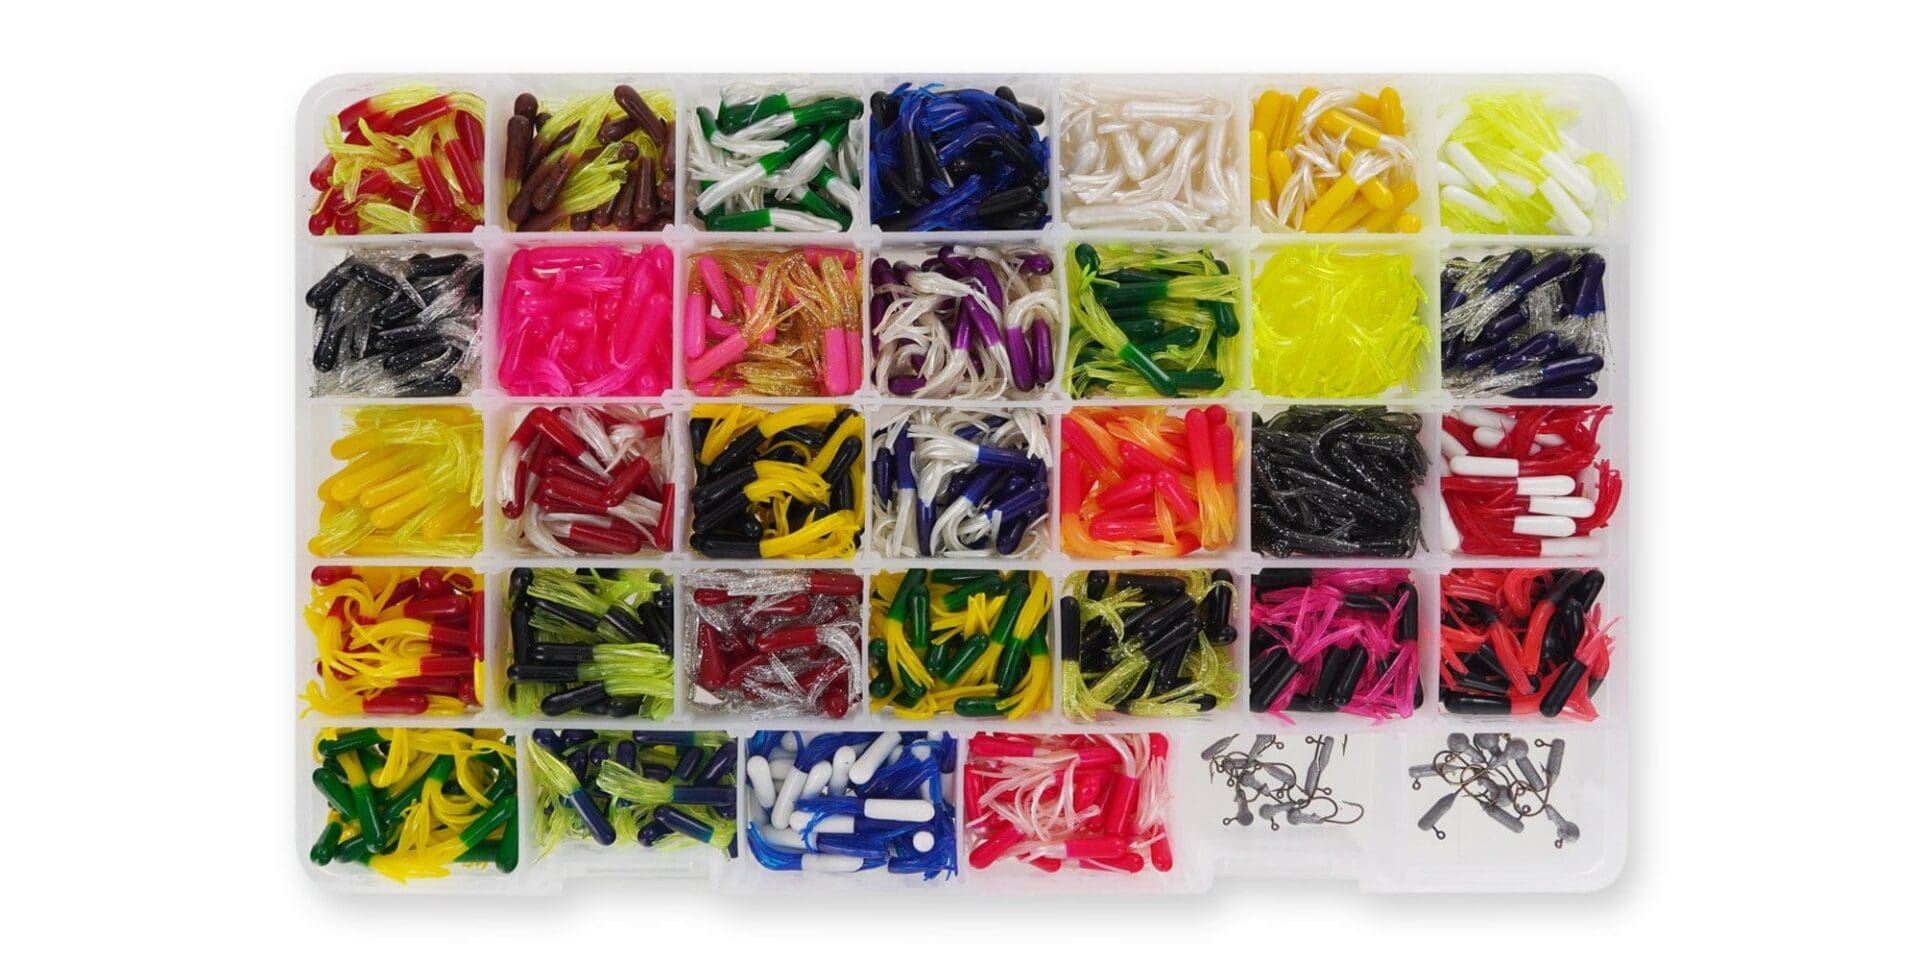 Crappie Kit - 53pcs. (SAVE $17.17 WHEN YOU BUY THE KIT) - Jammin Jigs